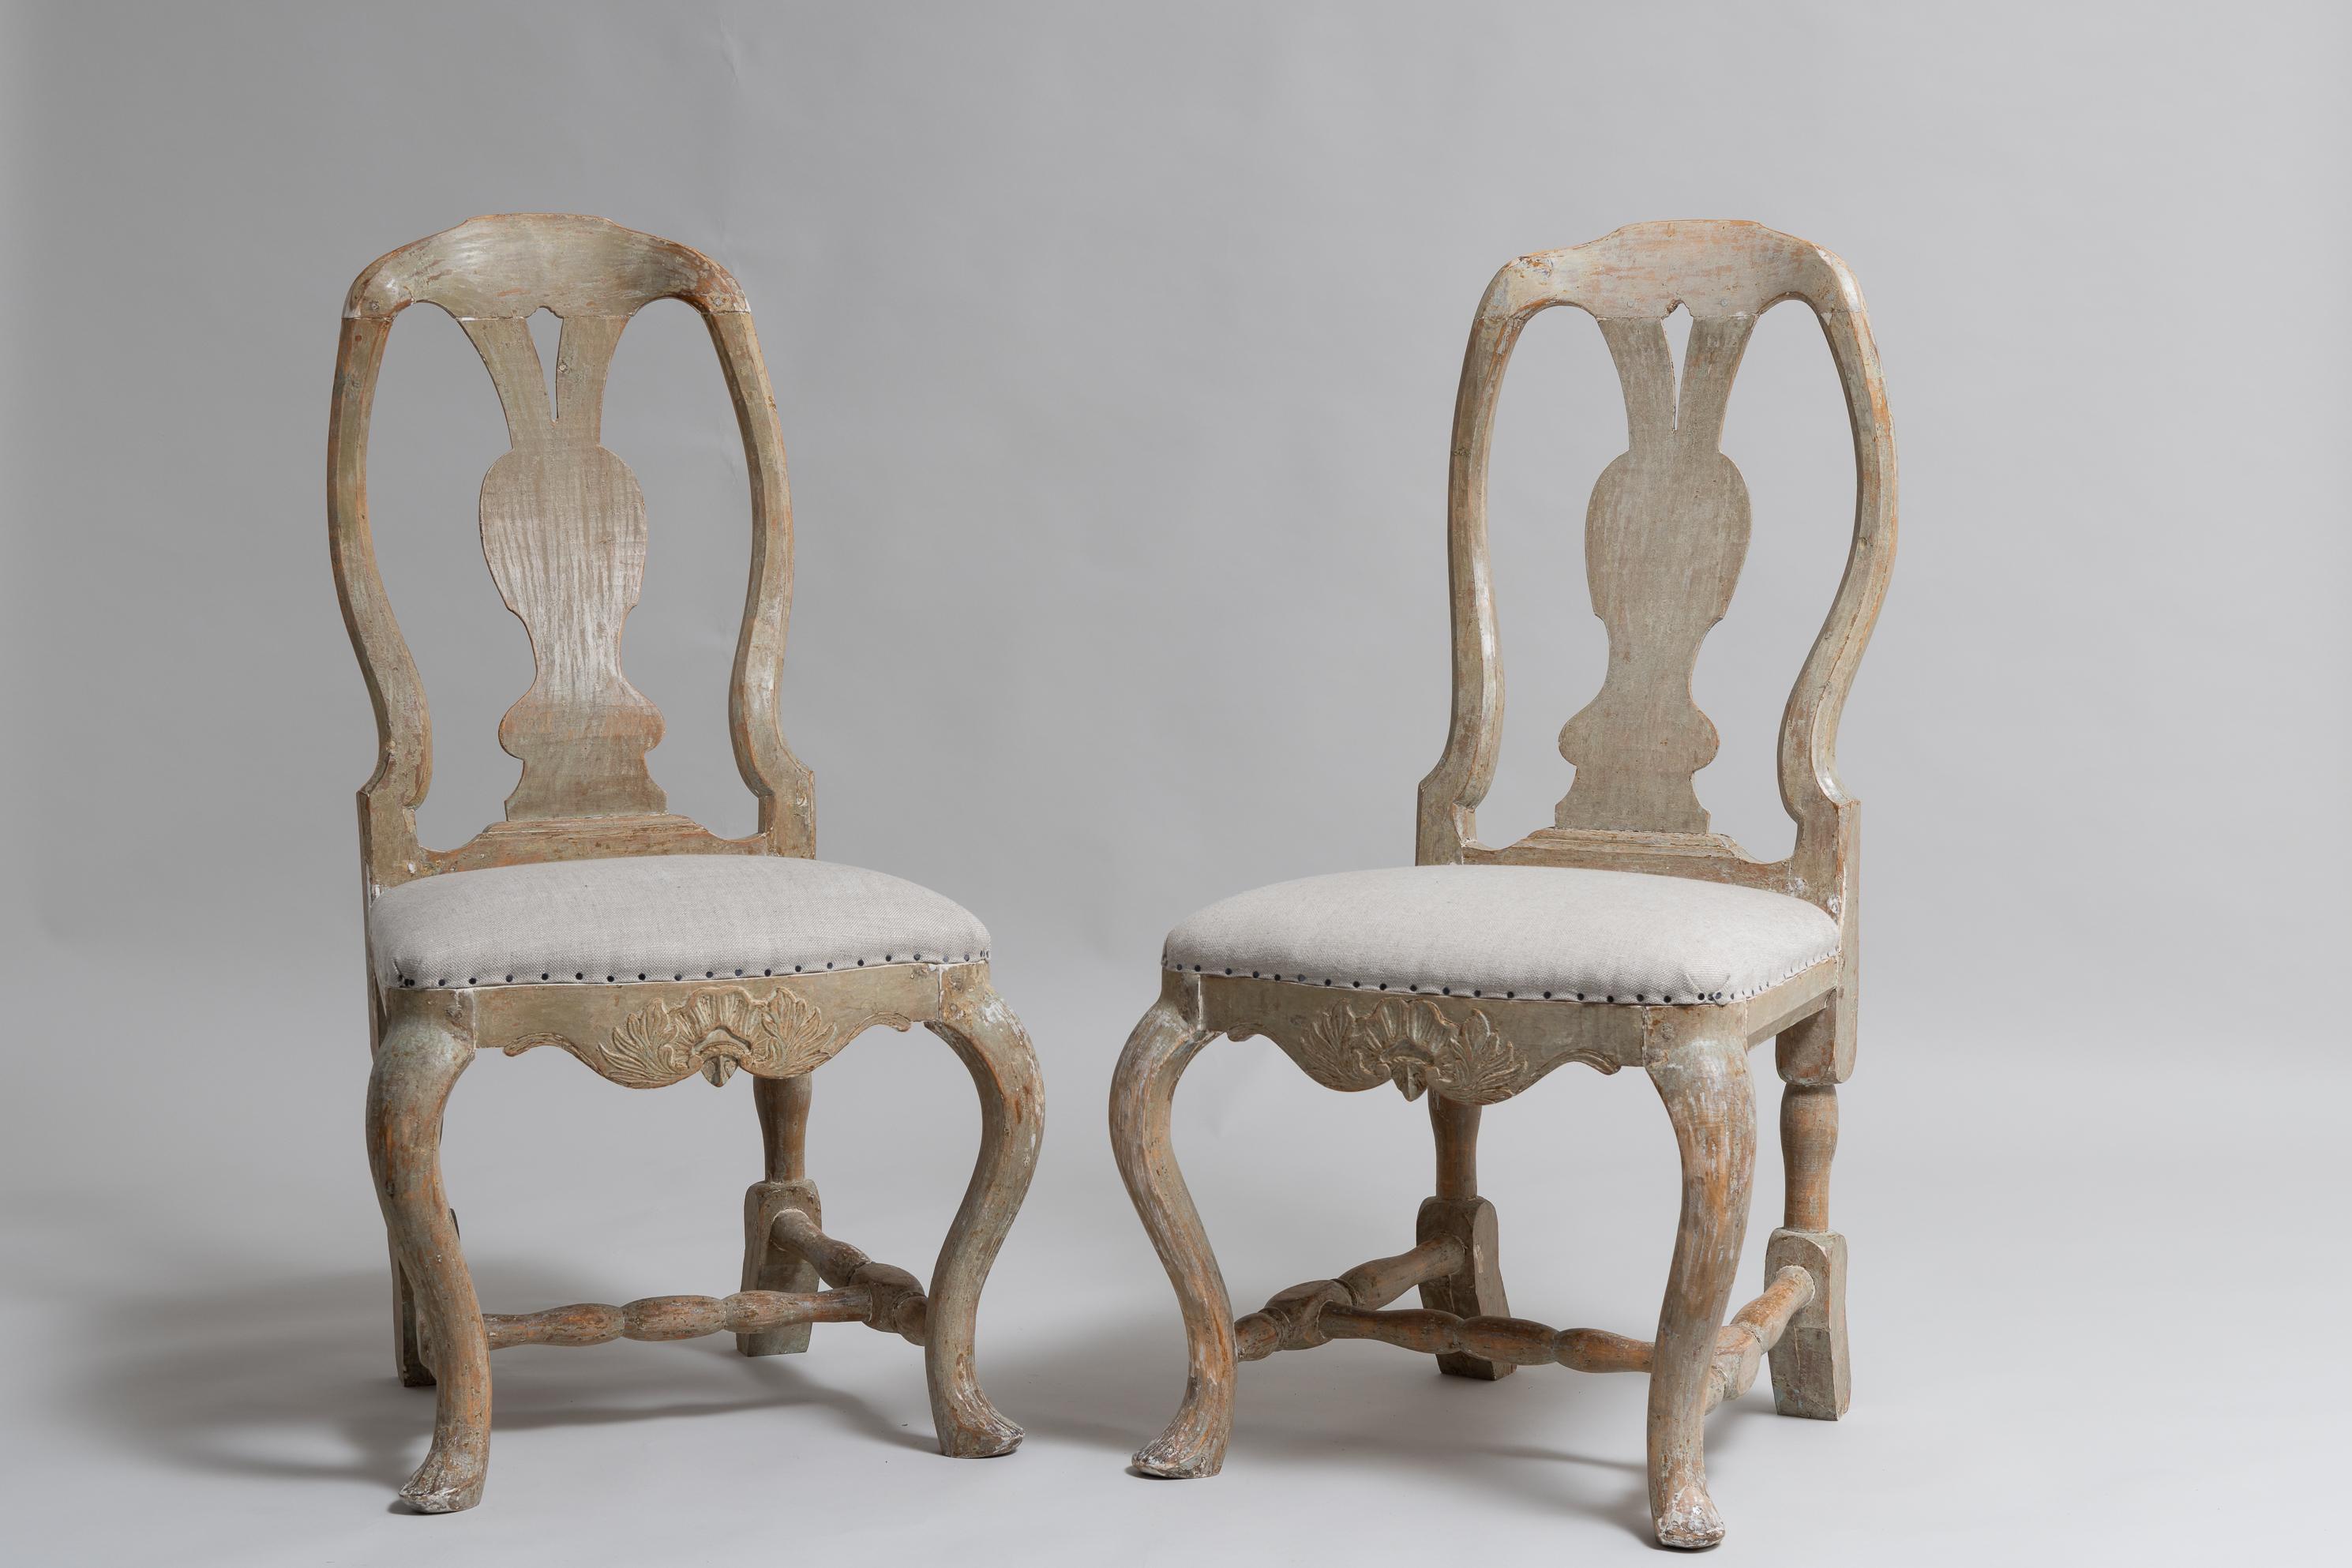 Set of 2 Swedish rococo chairs from the late 18th century, 1780 to 1790. The chairs are northern Swedish and dry scraped to the original paint from the late 1700s. The chairs have their origin in Västerbotten in Northern Sweden. They have the local